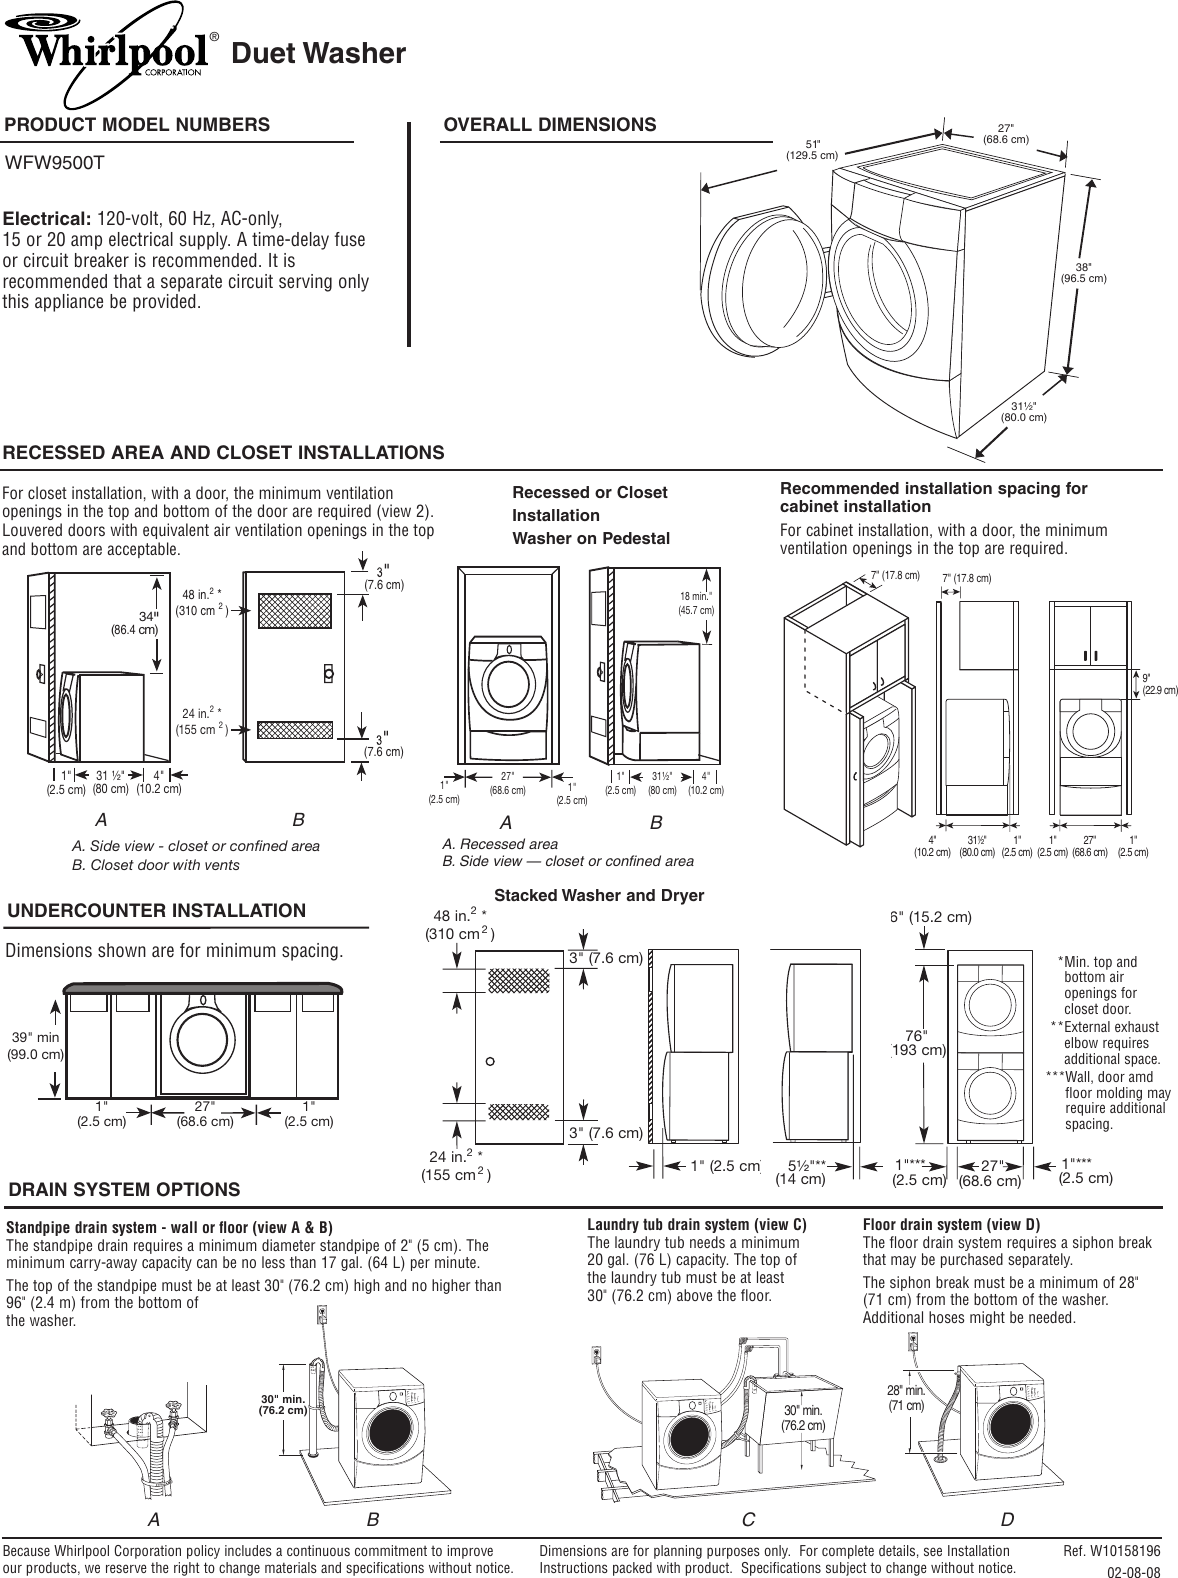 Page 1 of 1 - Whirlpool Whirlpool-Wfw9500T-Users-Manual- W10158196-D_WH  Whirlpool-wfw9500t-users-manual